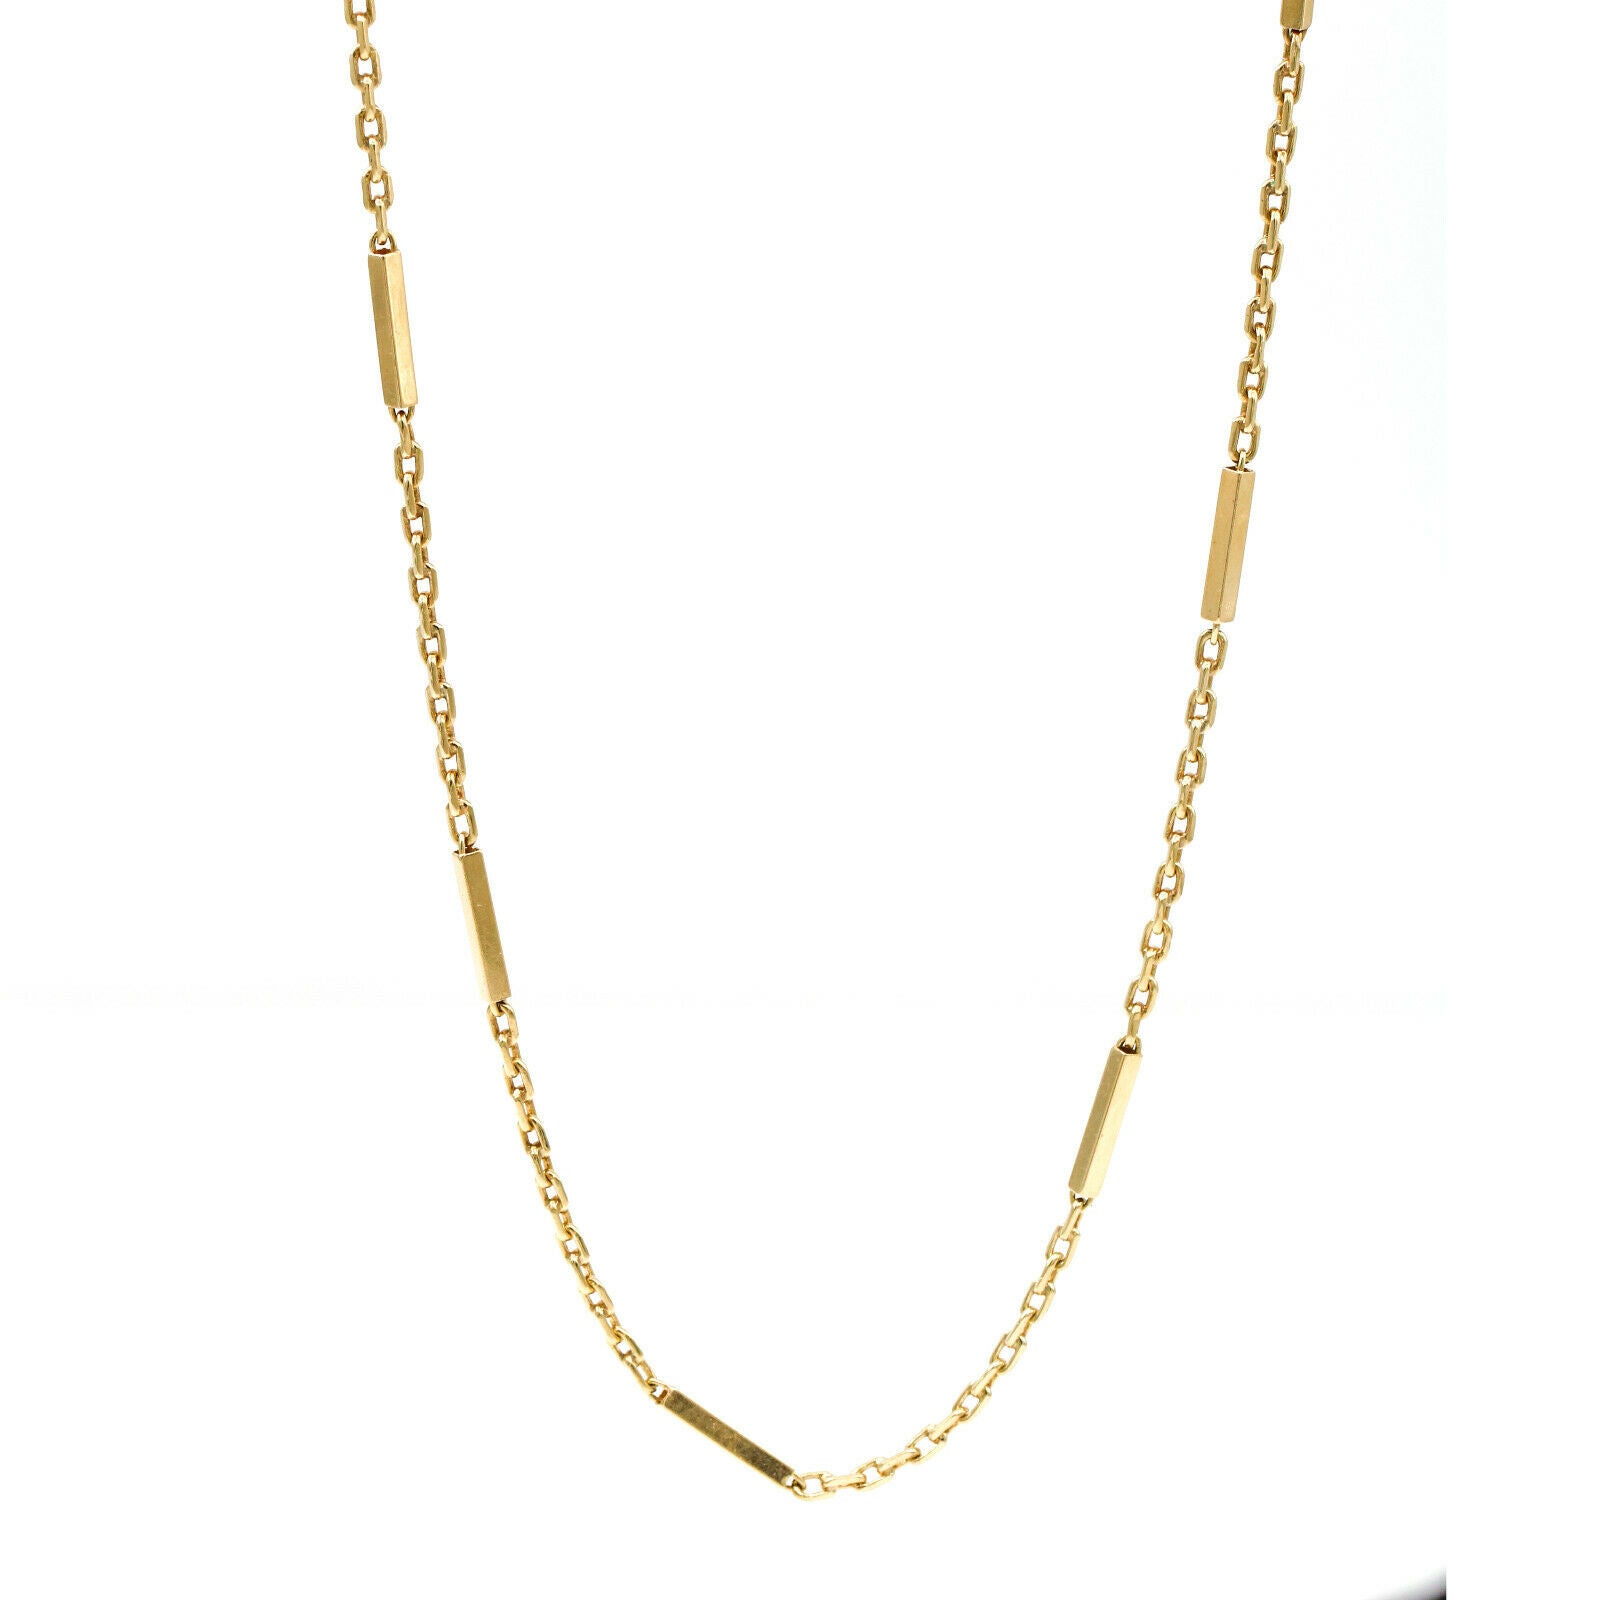 2mm Bar Link Chain in 14k Yellow Gold 18"